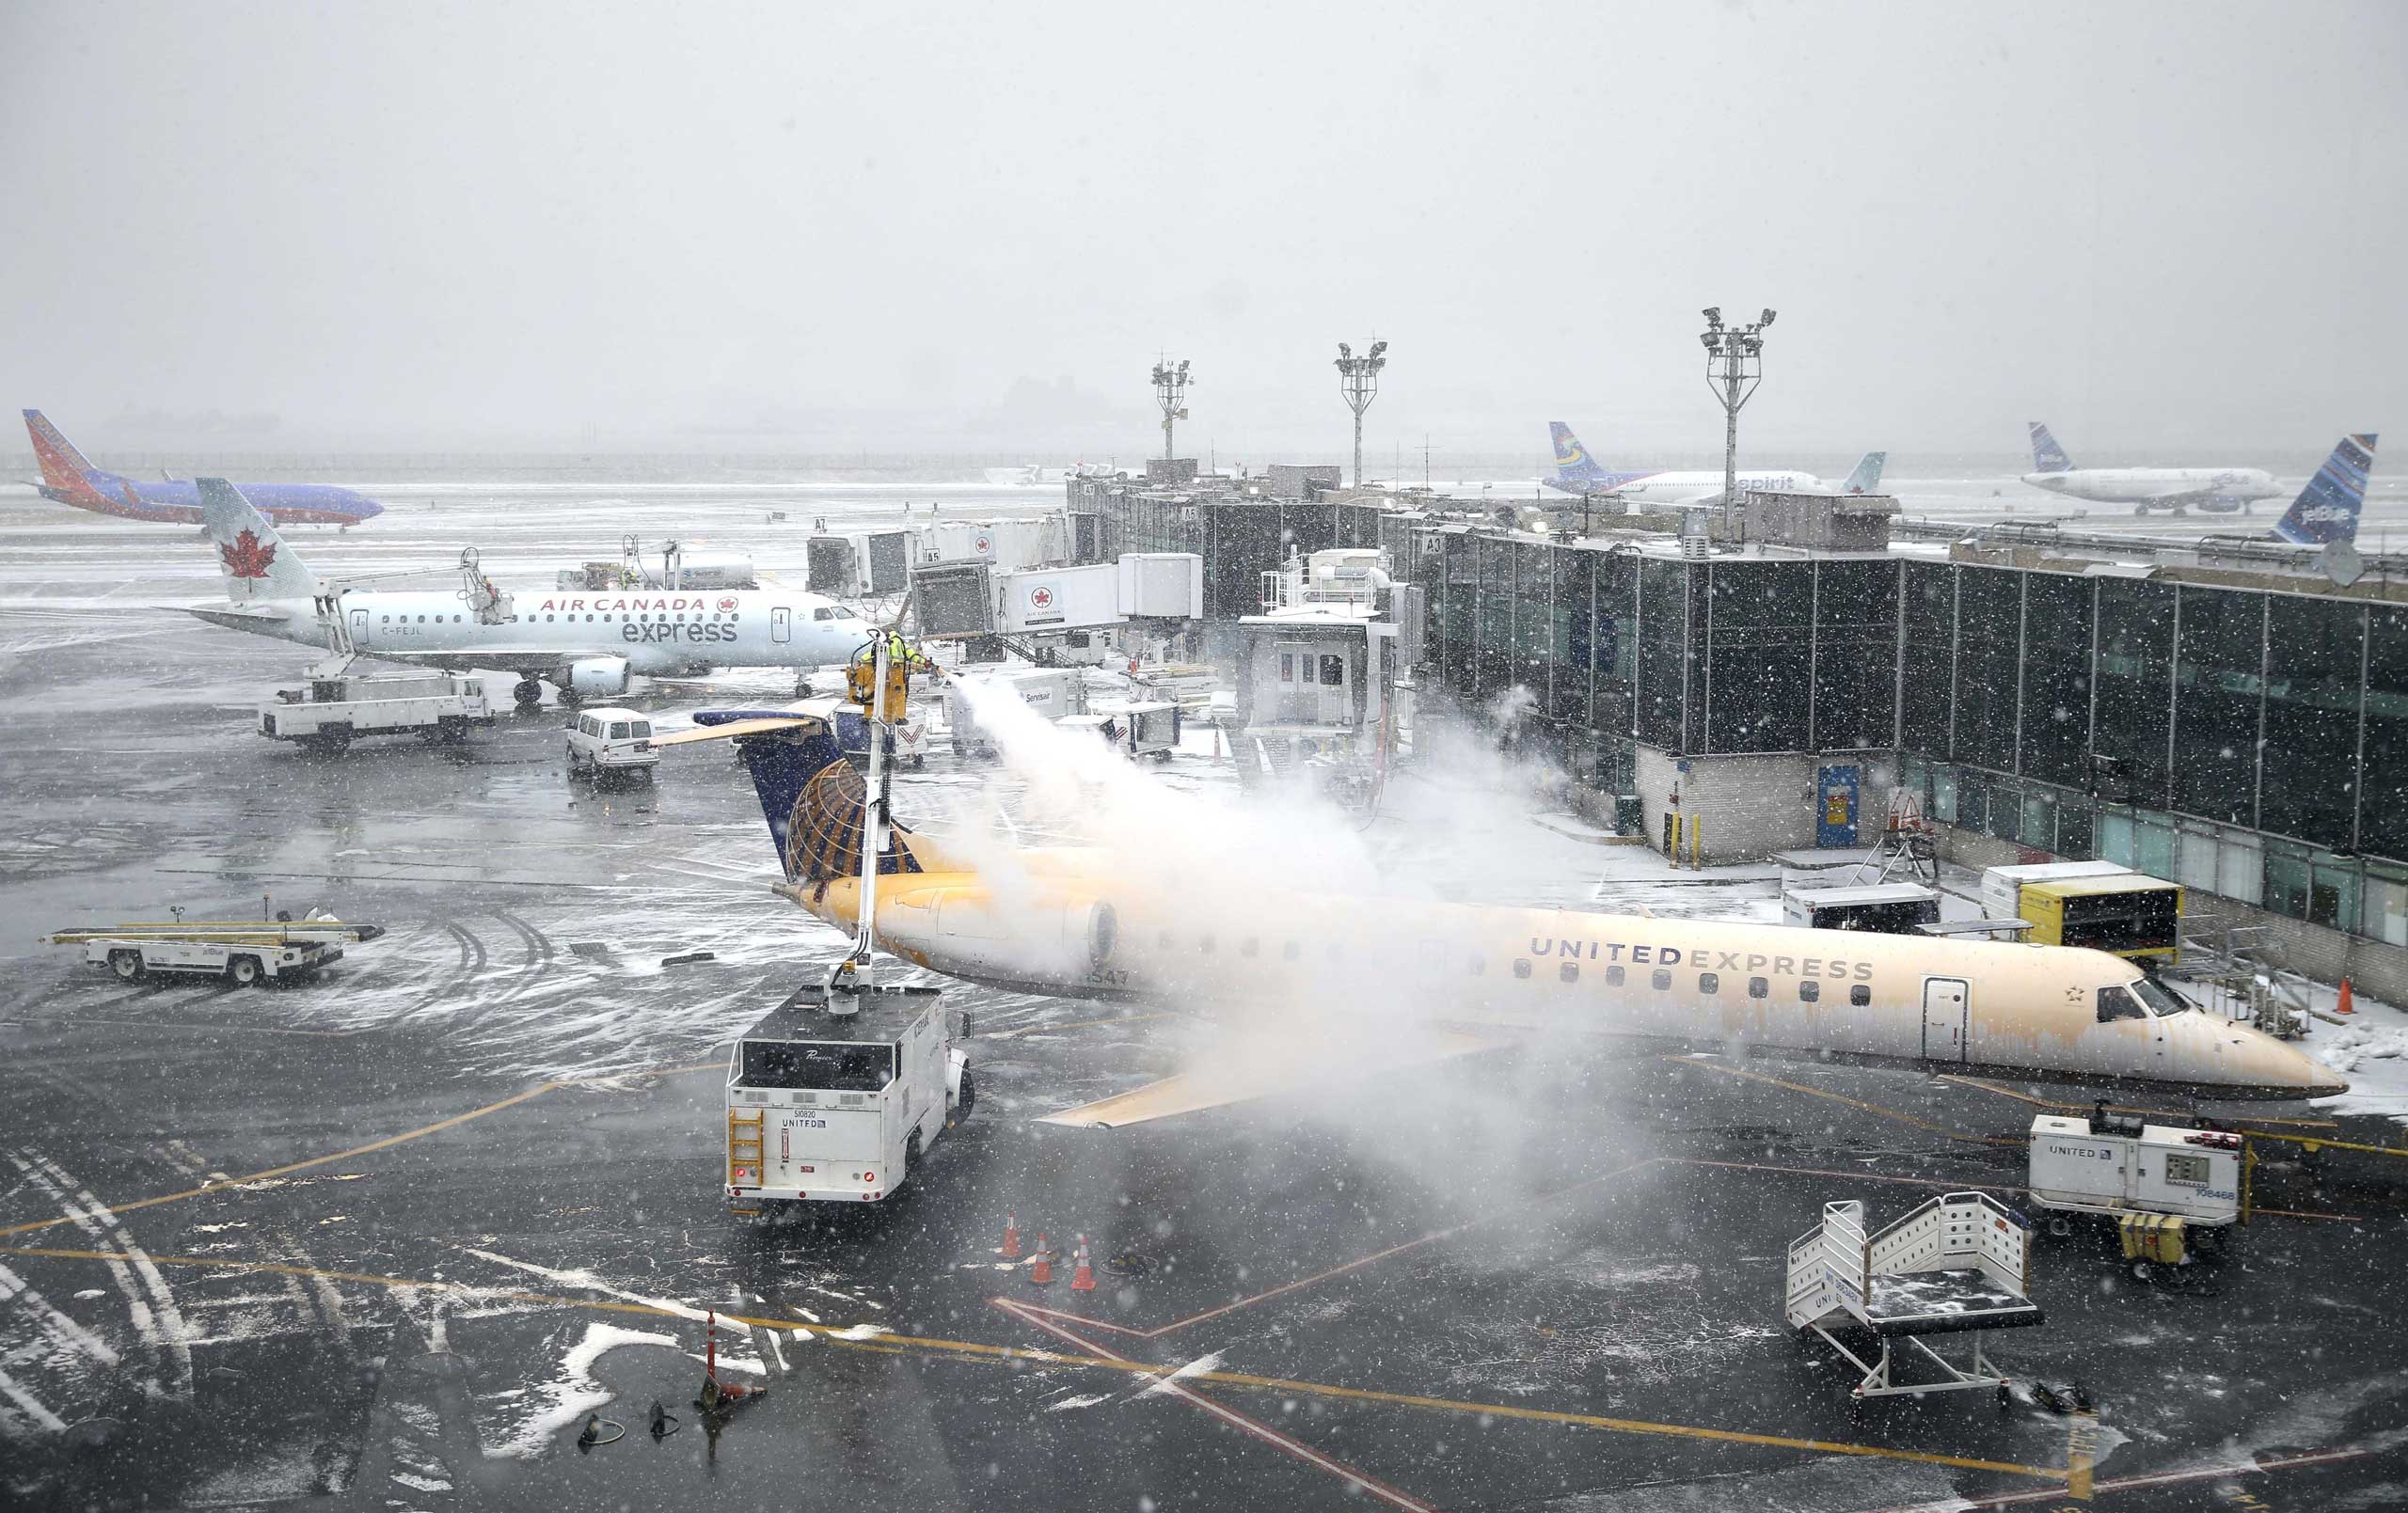 A plane is de-iced at LaGuardia Airport in New York City on Jan. 26, 2015. (Seth Wenig—AP)